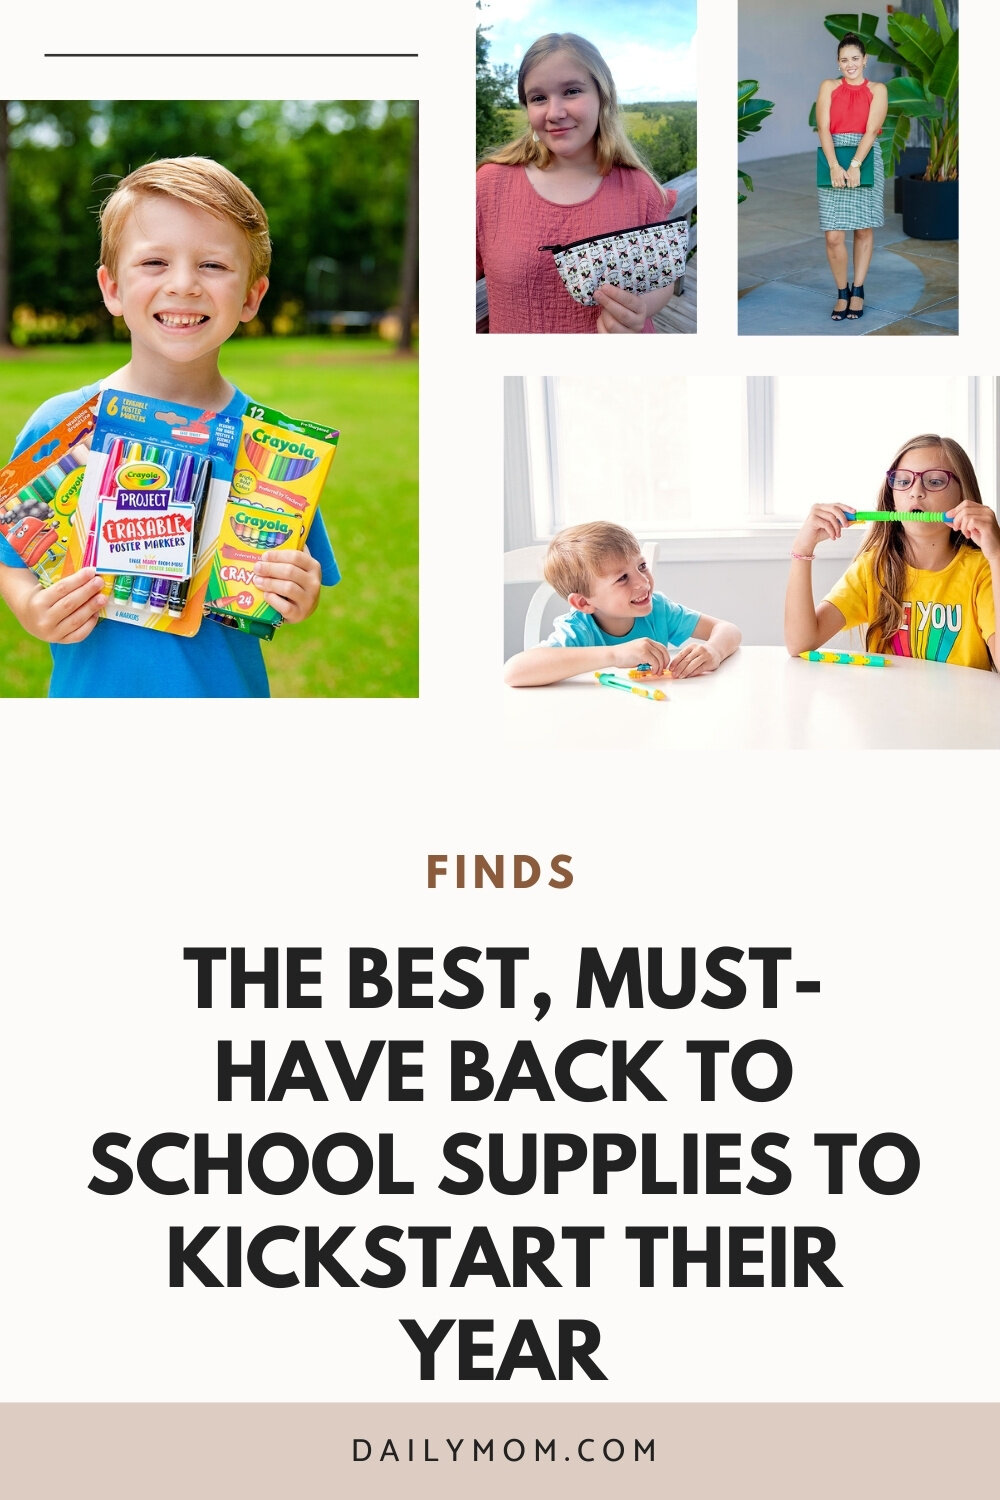 24 Must-Have Back To School Supplies To Kickstart Their Year